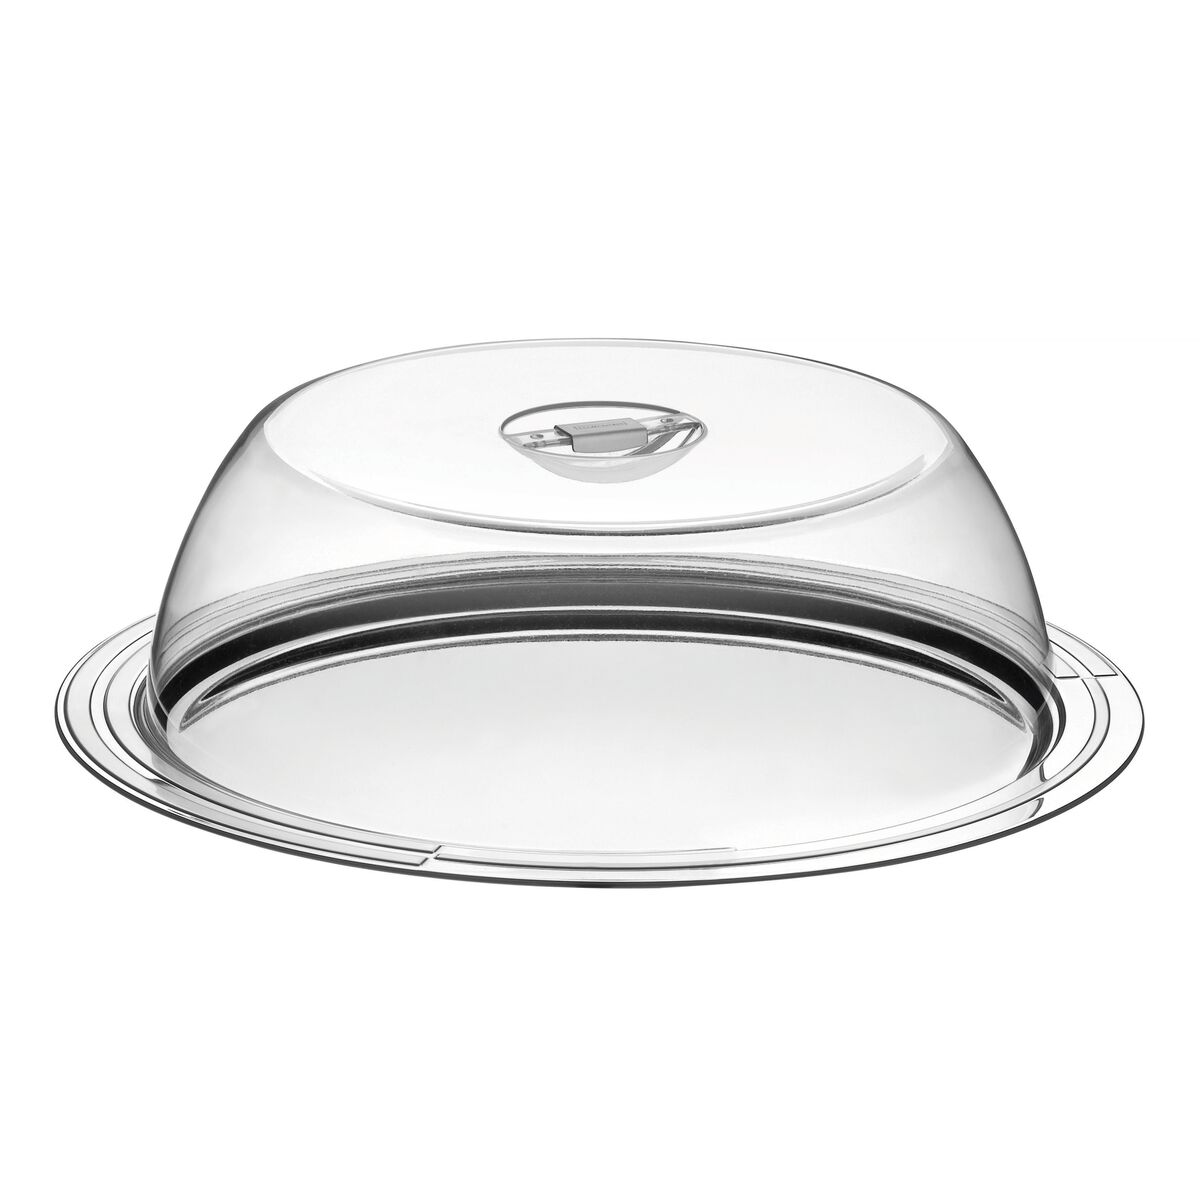 Tramontina Ciclo stainless steel cake dish with dome cover, 39.5 cm